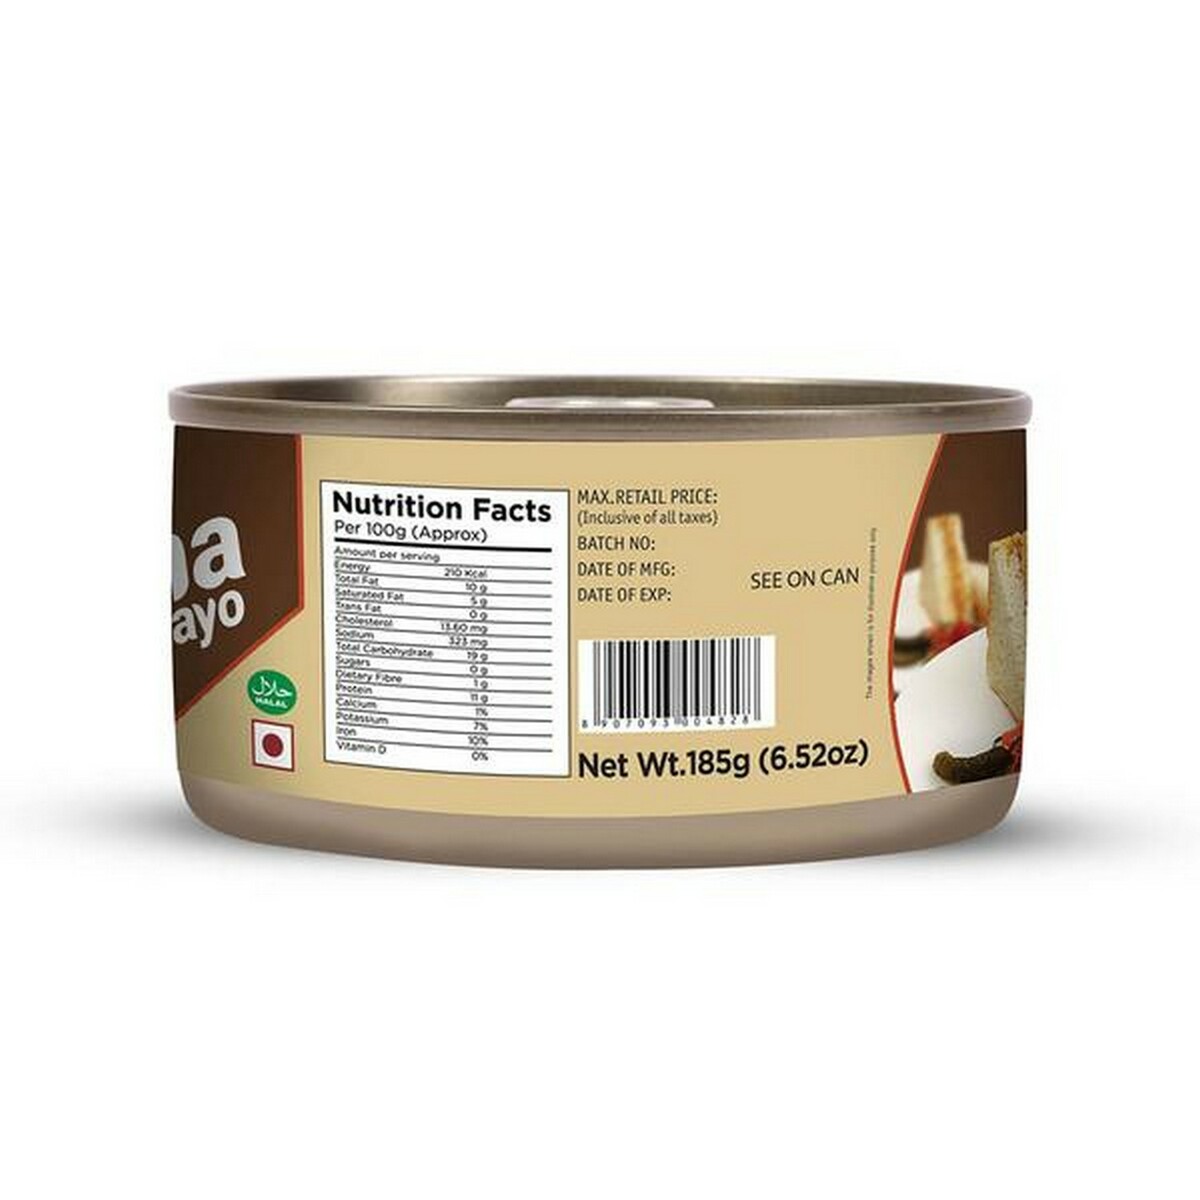 Tasty Nibbles Light Meat Tuna In  Mayonnaise 185G